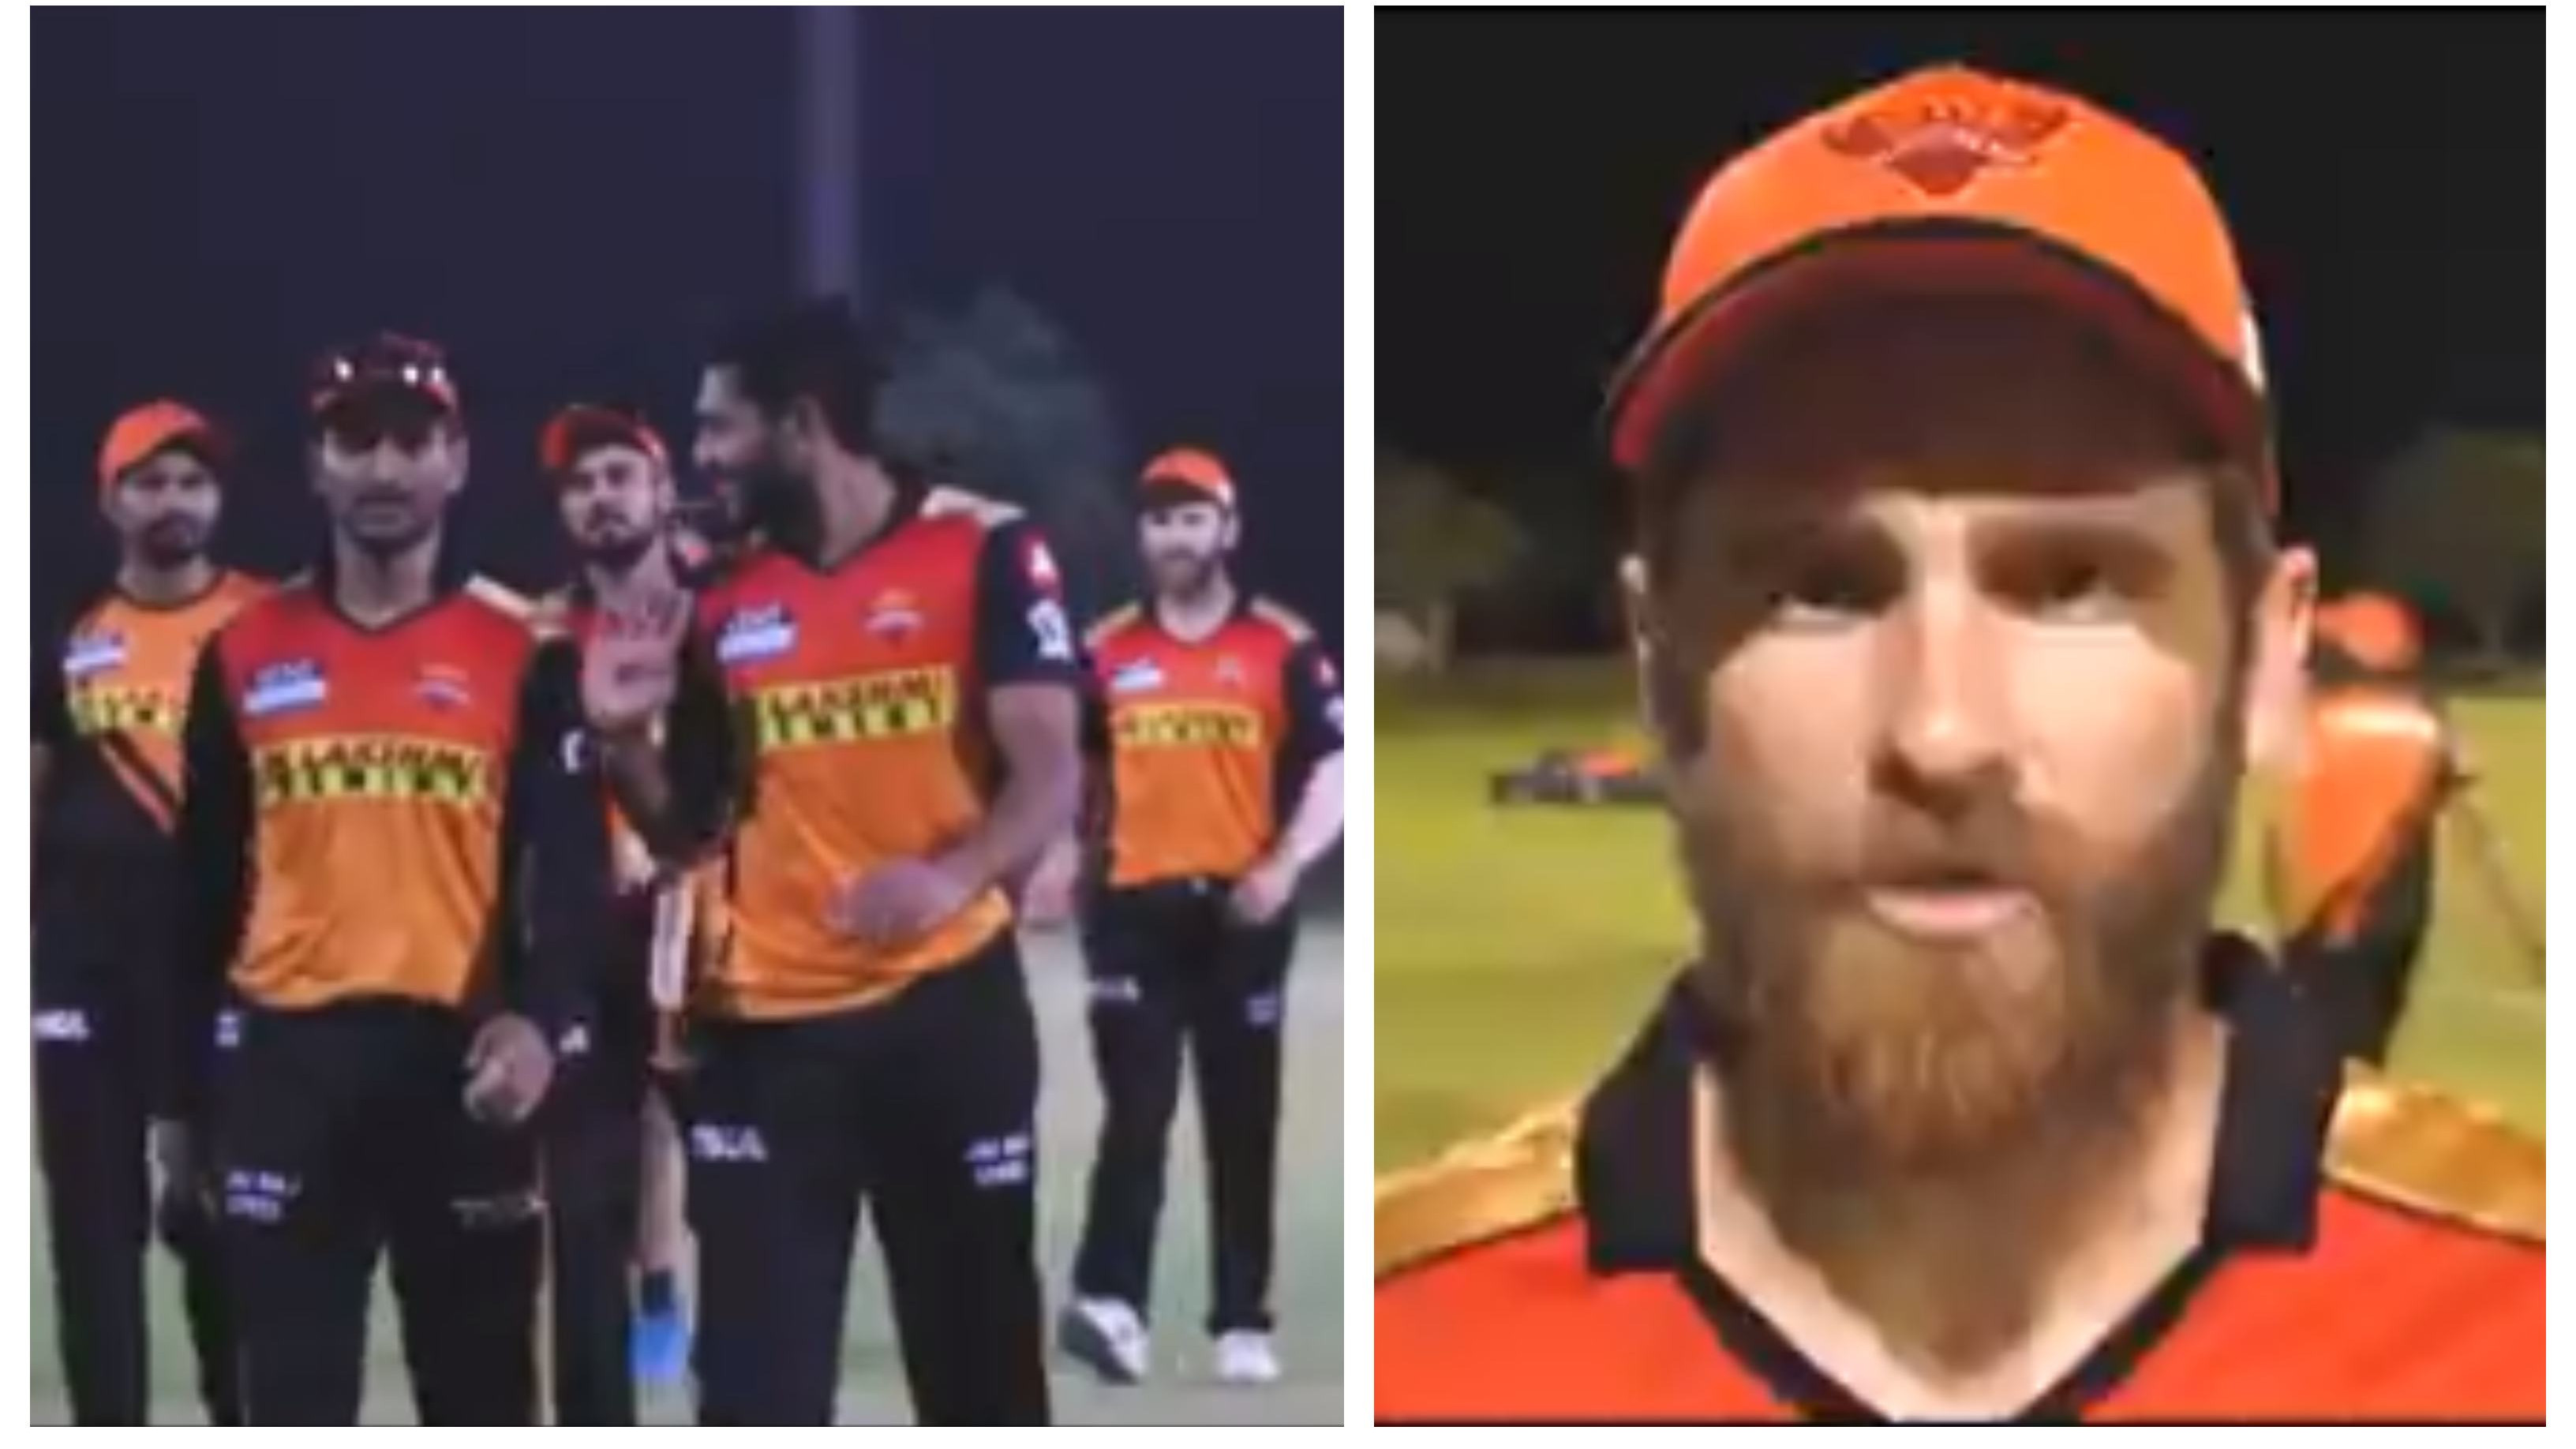 IPL 2021: WATCH – Williamson pleased to see good performances from several SRH players in practice game